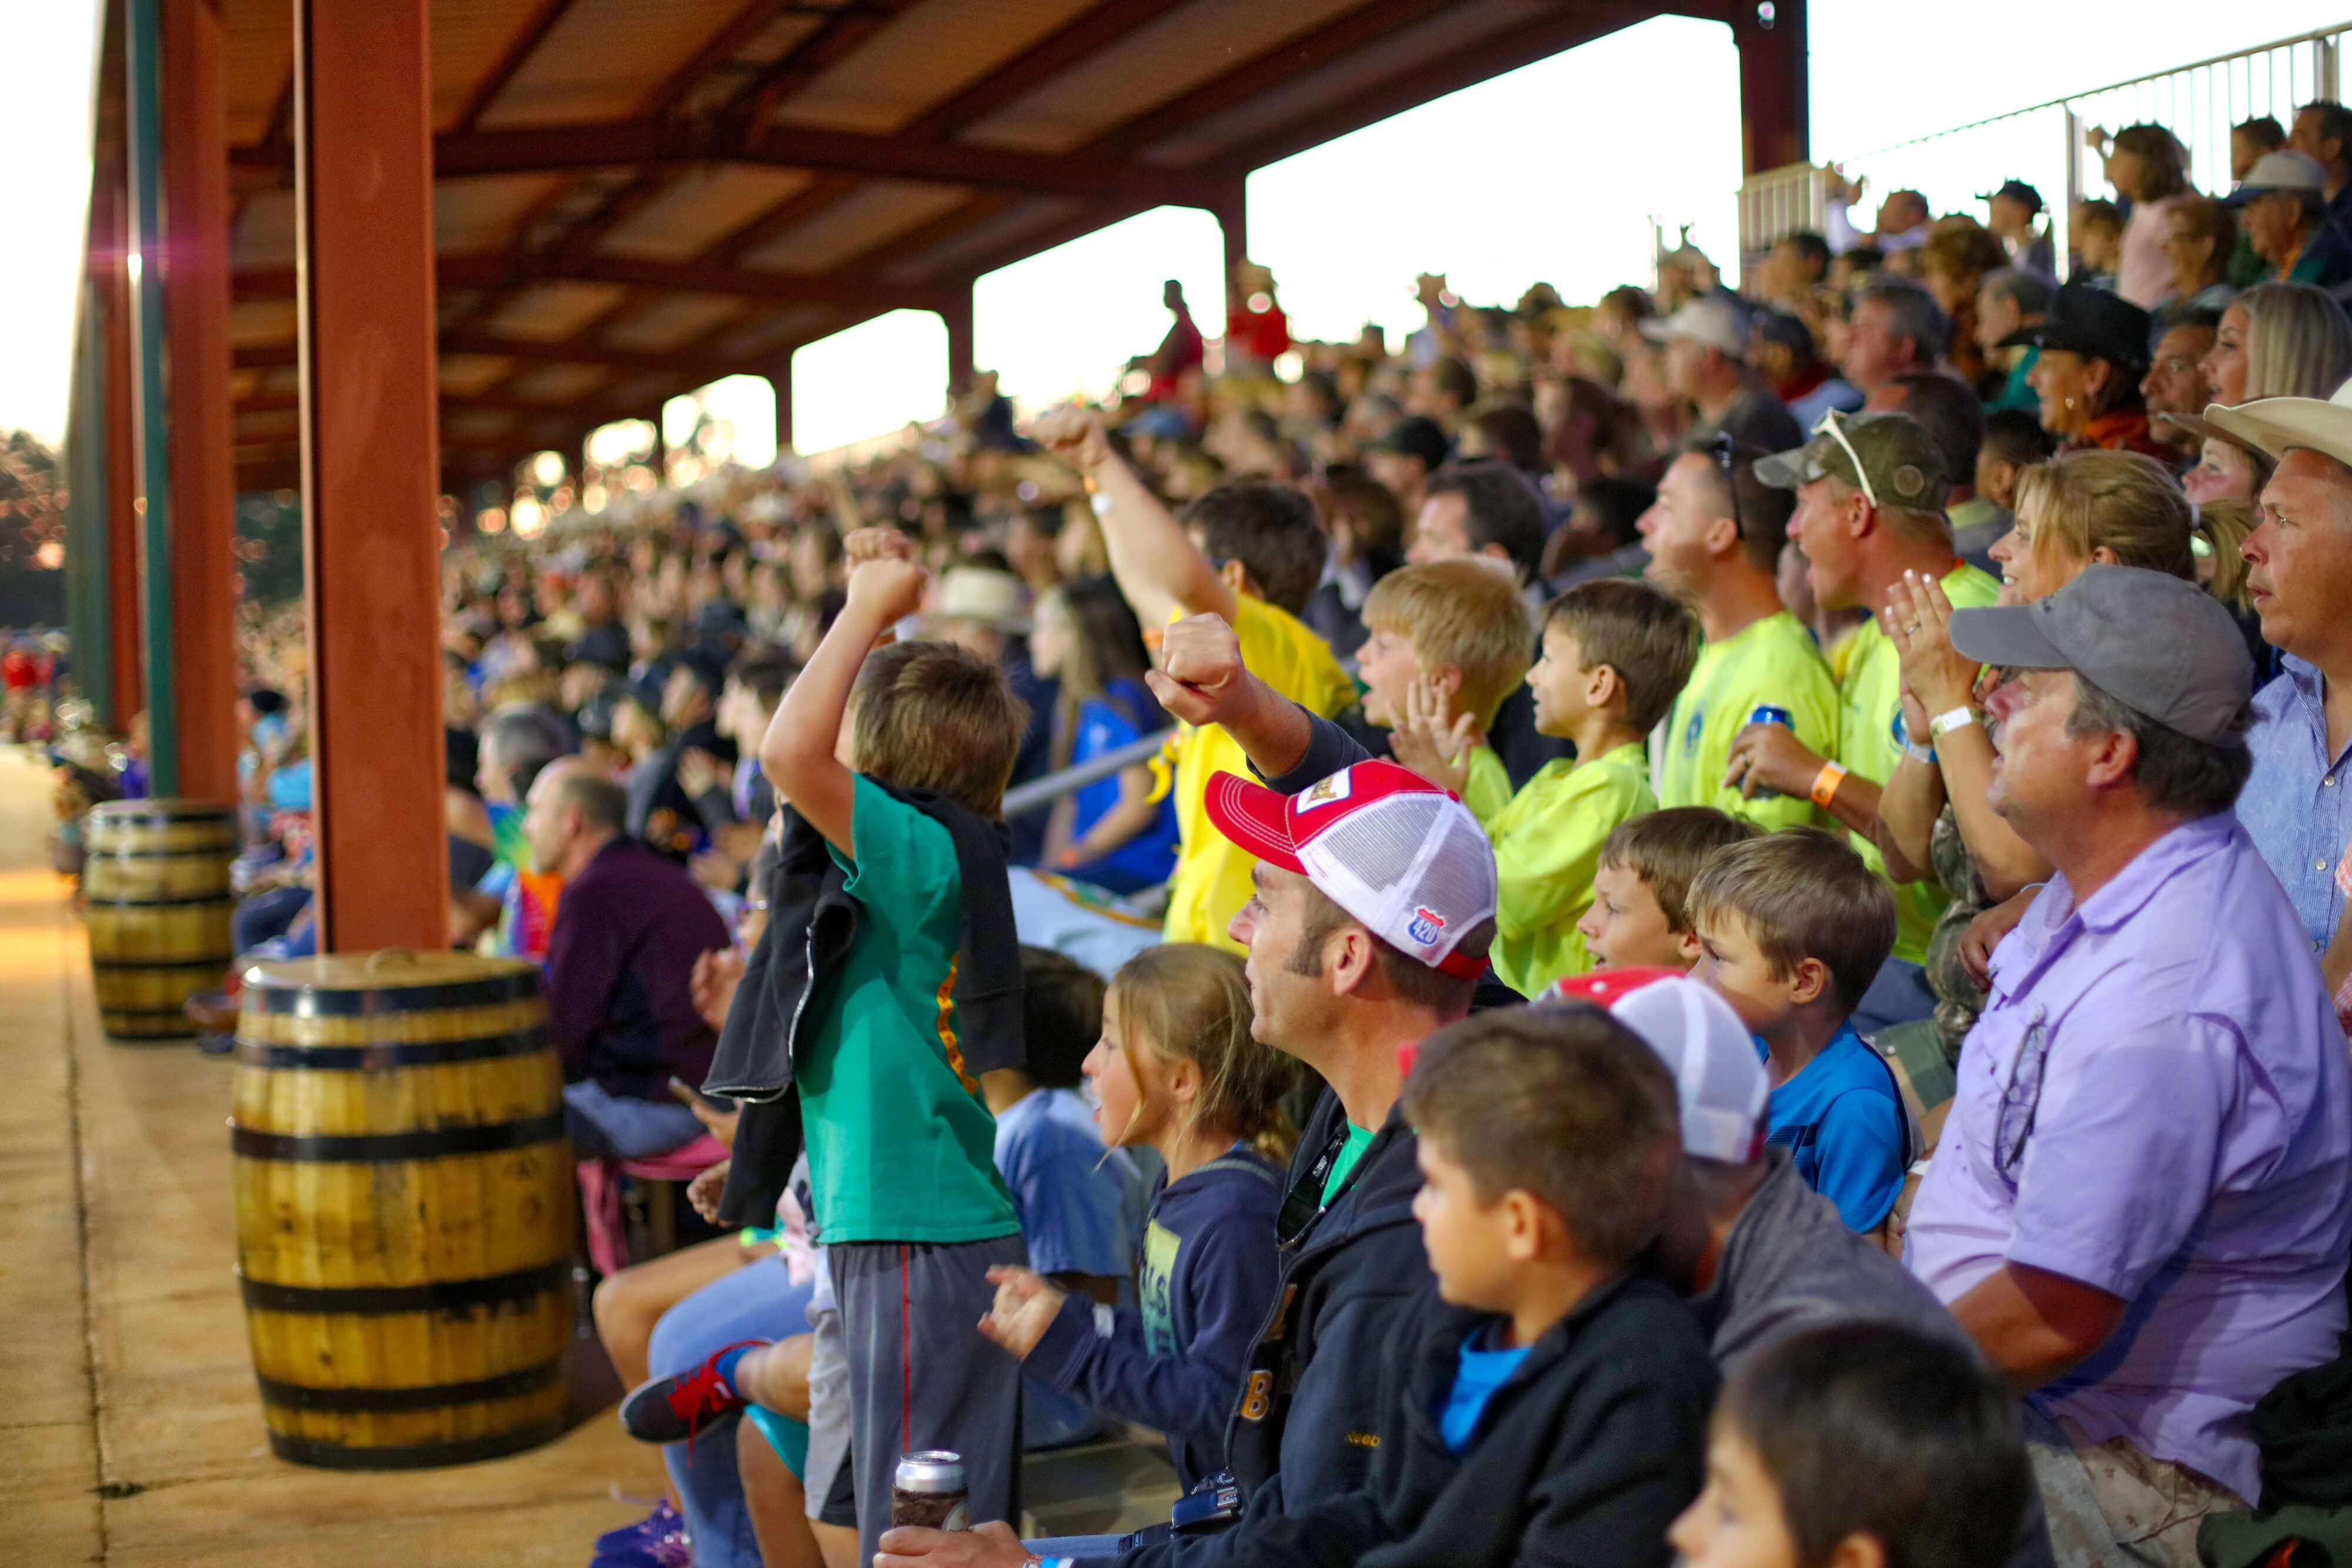 Families cheering at Championship Rodeo | Westgate River Ranch Resort & Rodeo | Westgate Resorts